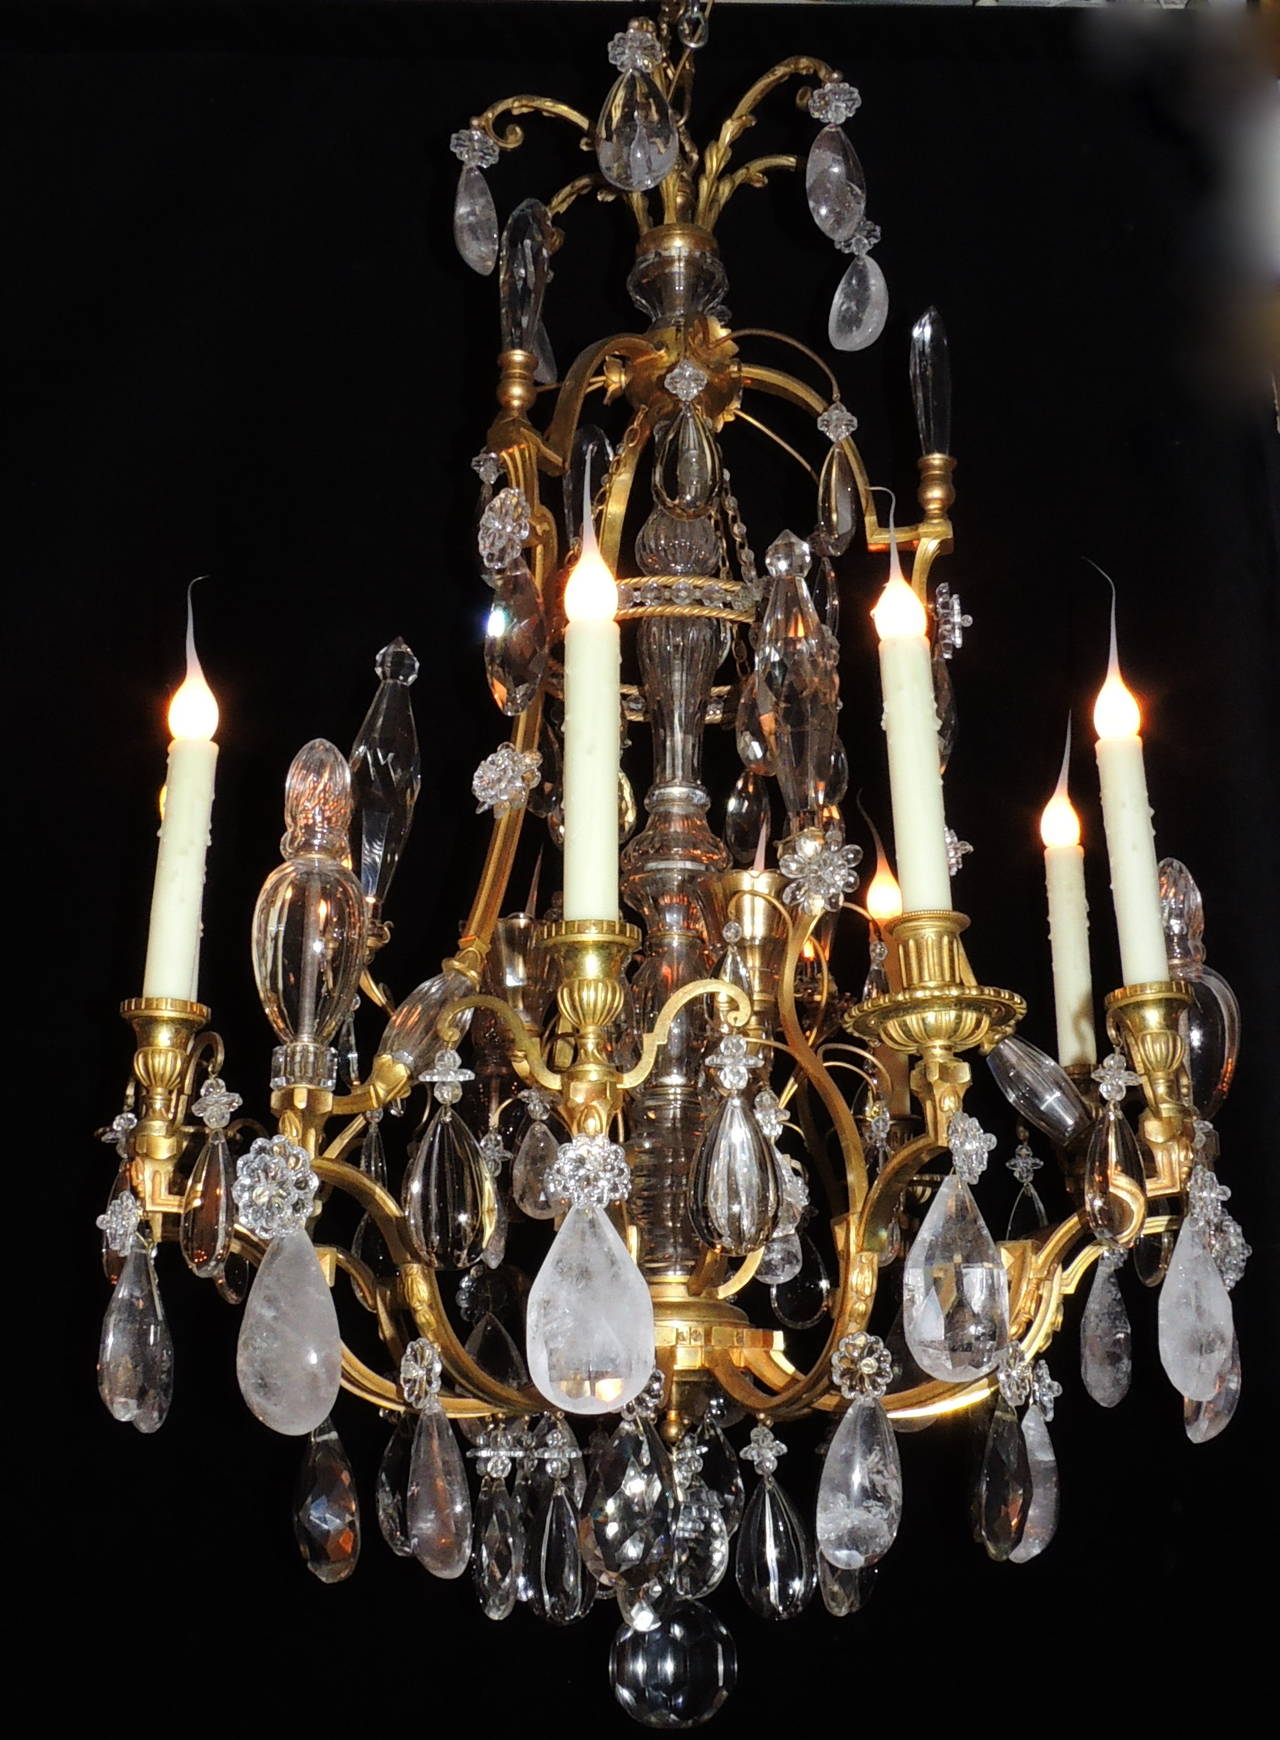 This wonderful twelve-light doré bronze rock crystal and crystal chandelier has beautiful large rock crystal drops accented by crystal flowers and elegant cut crystal prisms which help disperse the light throughout the room. The chandelier also has